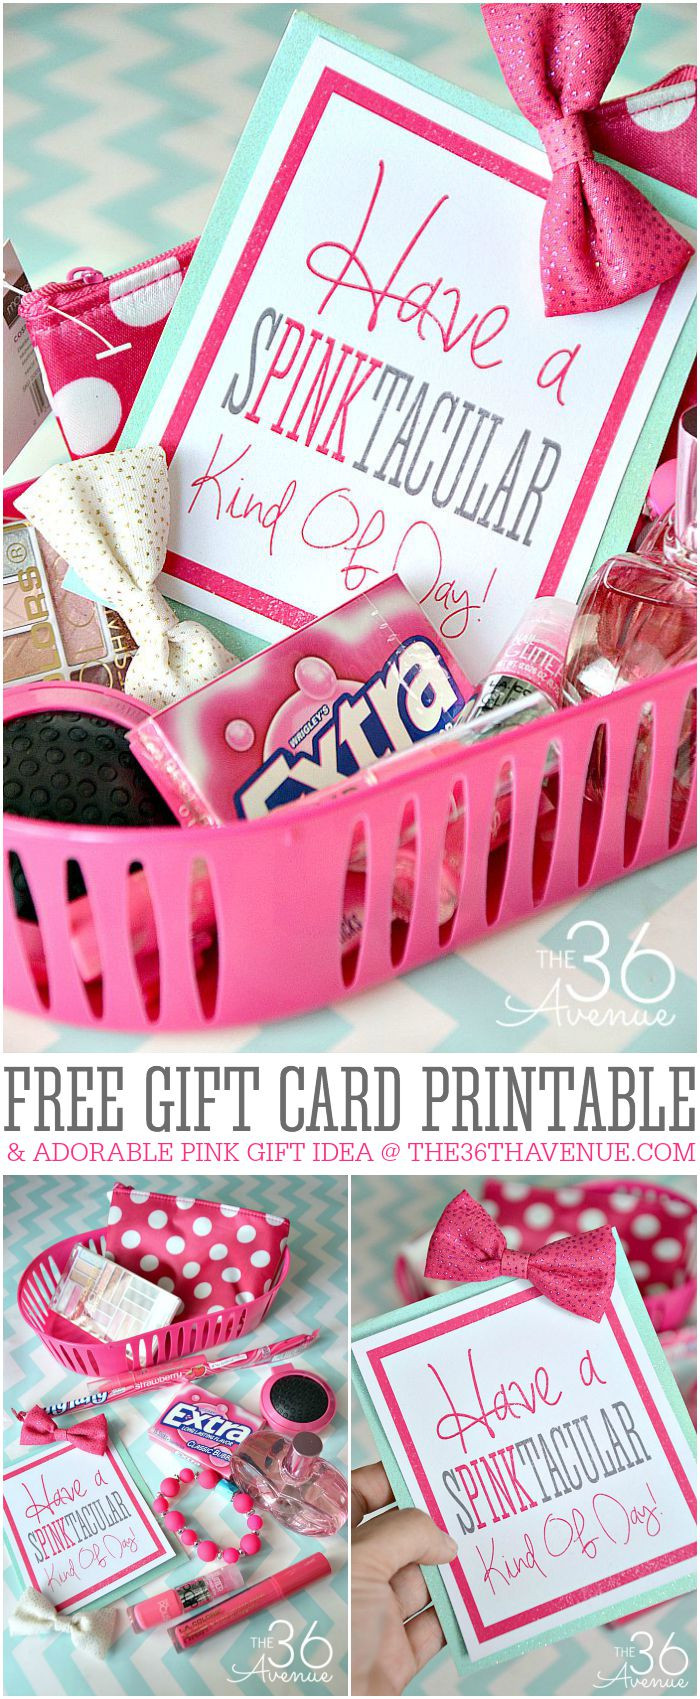 Free Gift Ideas For Girlfriend
 Gift Idea and Free Gift Card Printable The 36th AVENUE